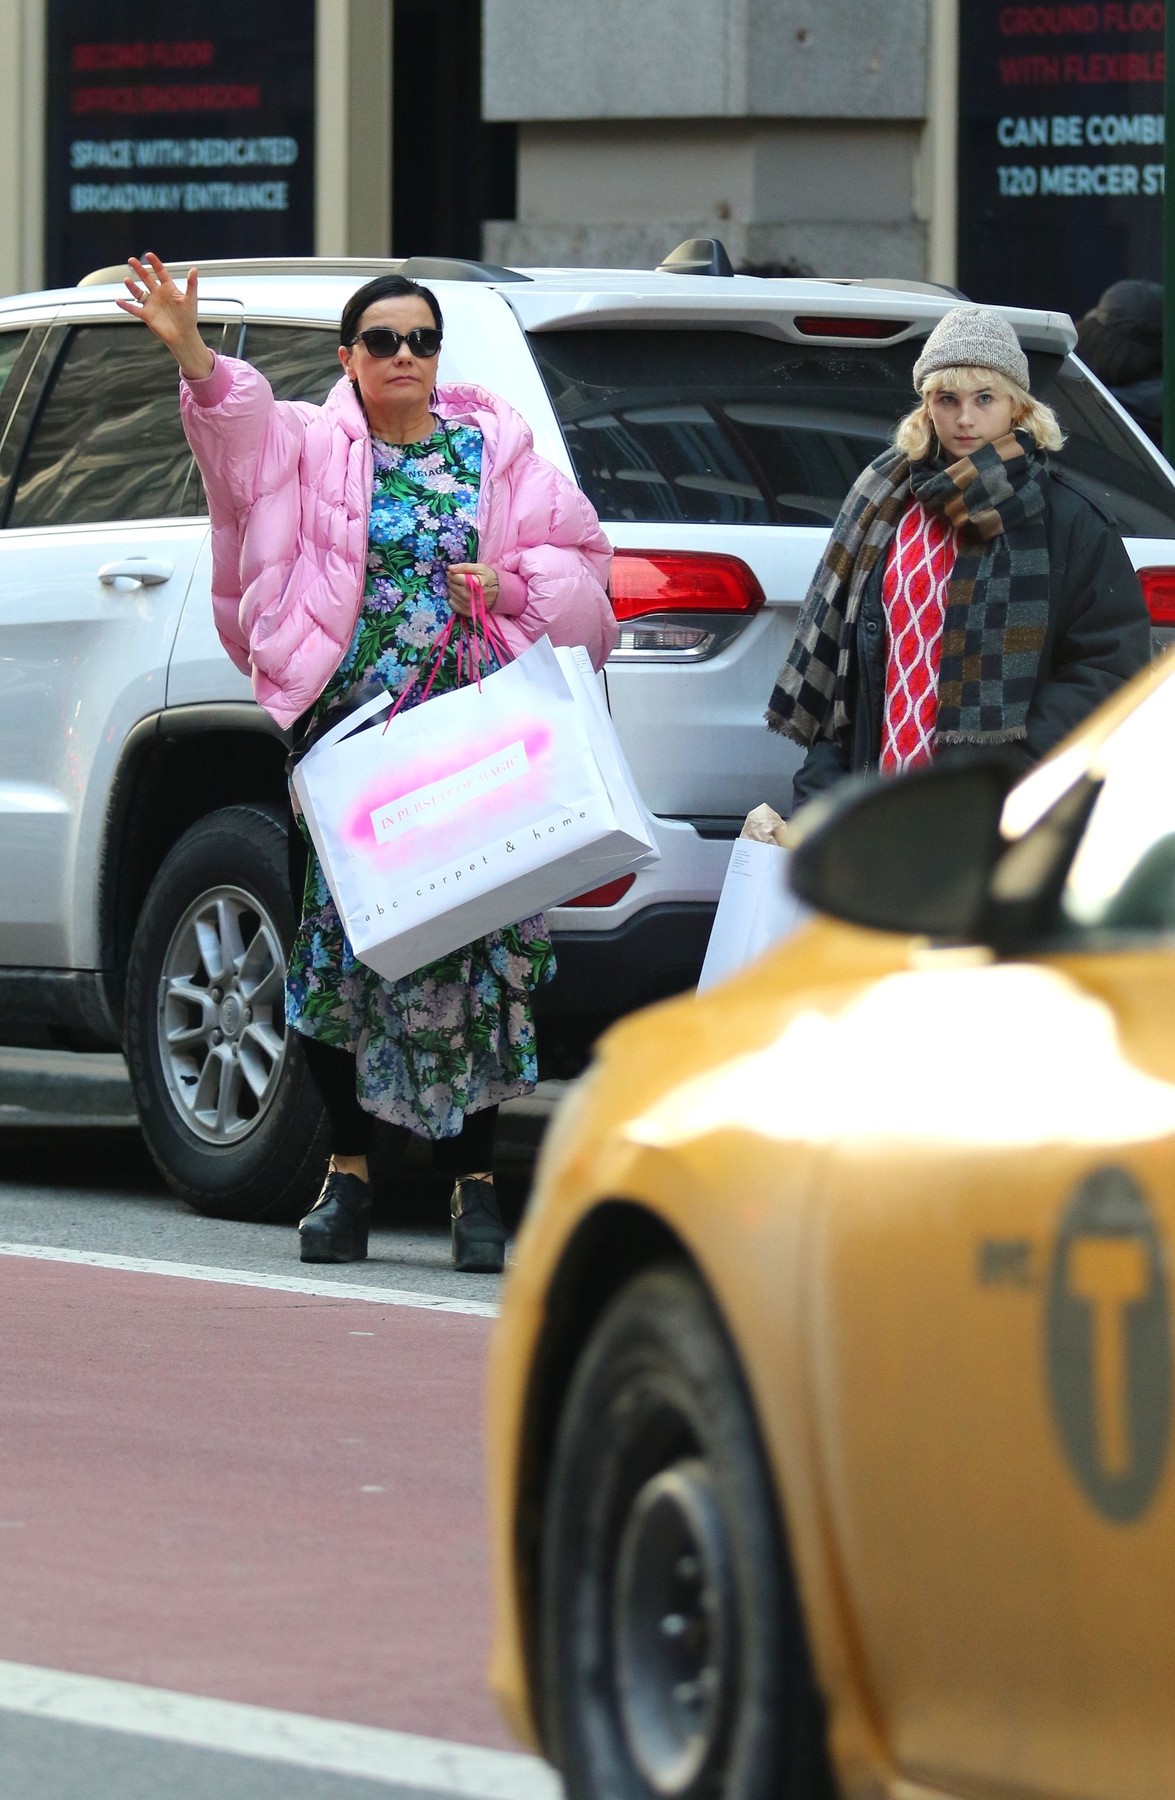 New York, NY  - Bjork and her daughter Isadora make a rare public appearance while hailing a cab after doing some shopping in Manhattan's Soho area.

BACKGRID USA 19 JANUARY 2020, Image: 493663349, License: Rights-managed, Restrictions: , Model Release: no, Credit line: BrosNYC / BACKGRID / Backgrid USA / Profimedia